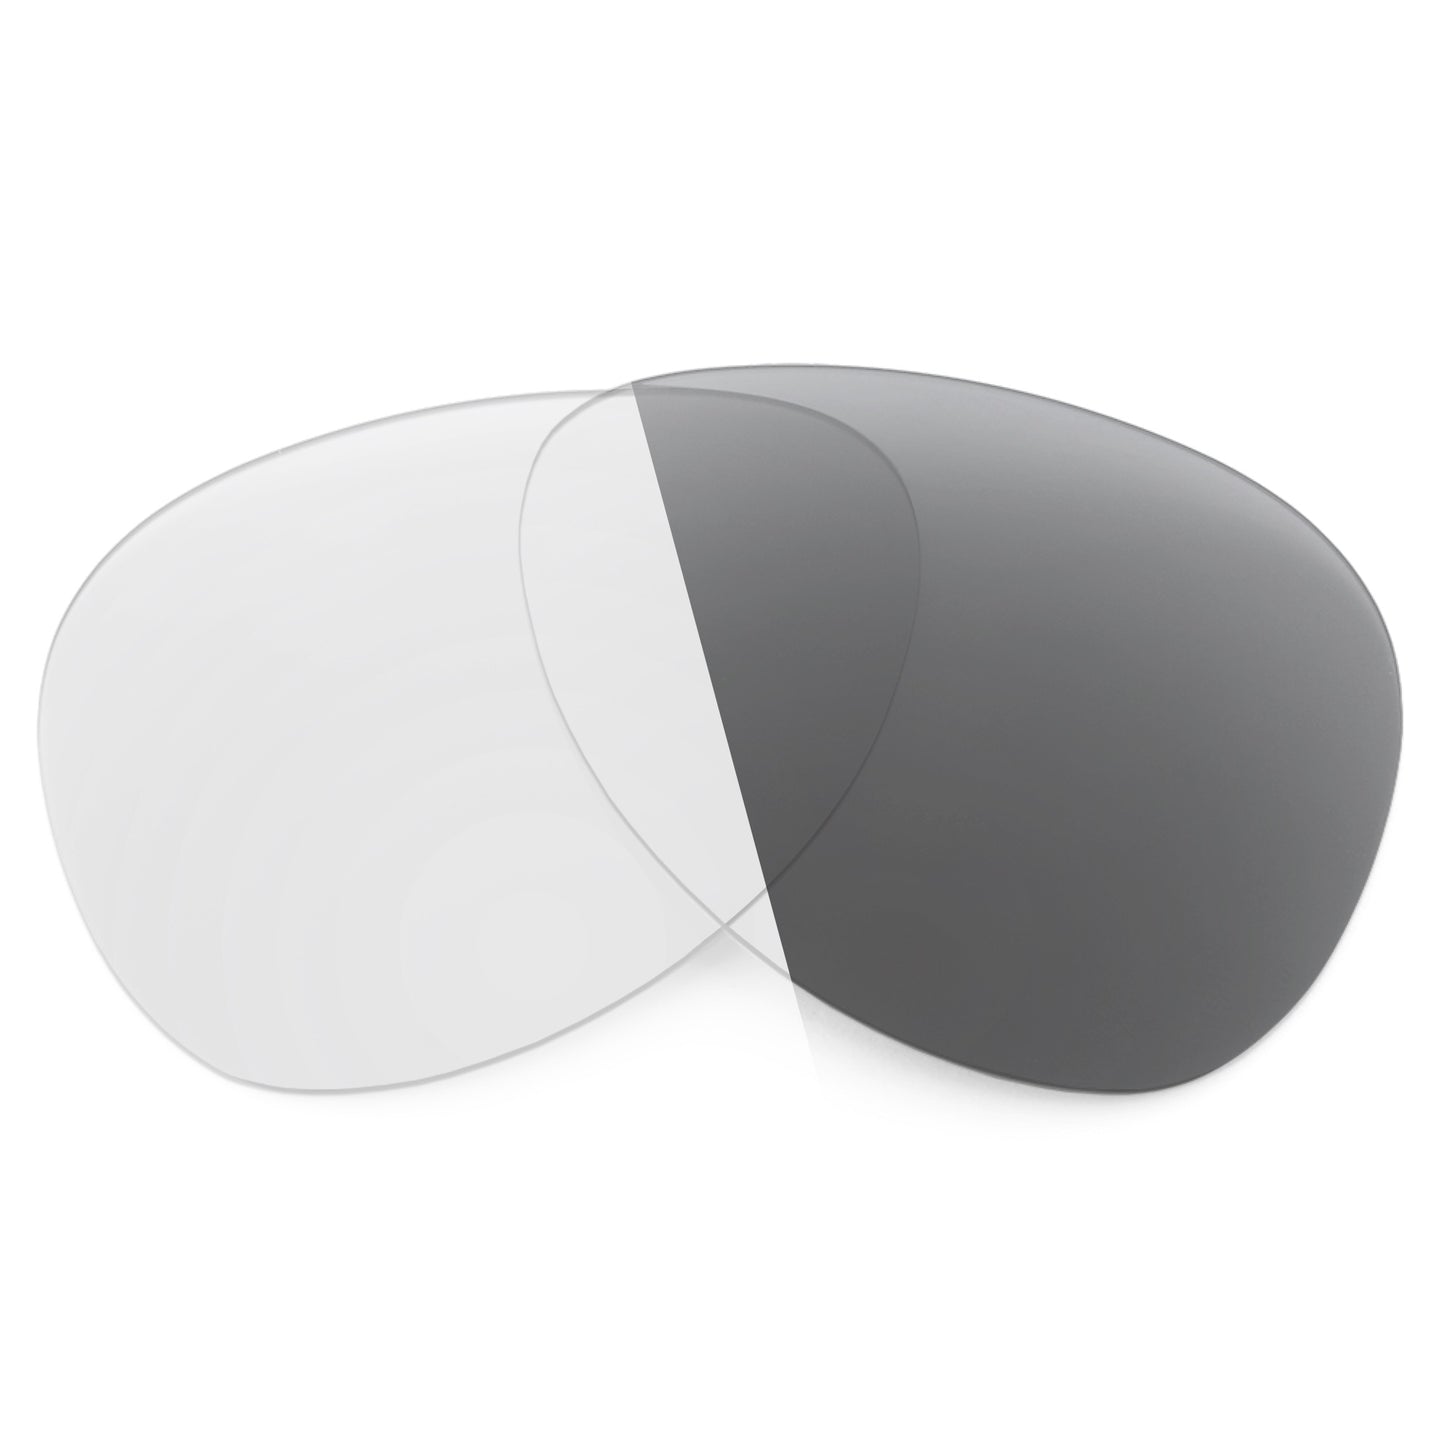 Revant replacement lenses for Maui Jim Cinder Cone MJ789 Non-Polarized Adapt Gray Photochromic